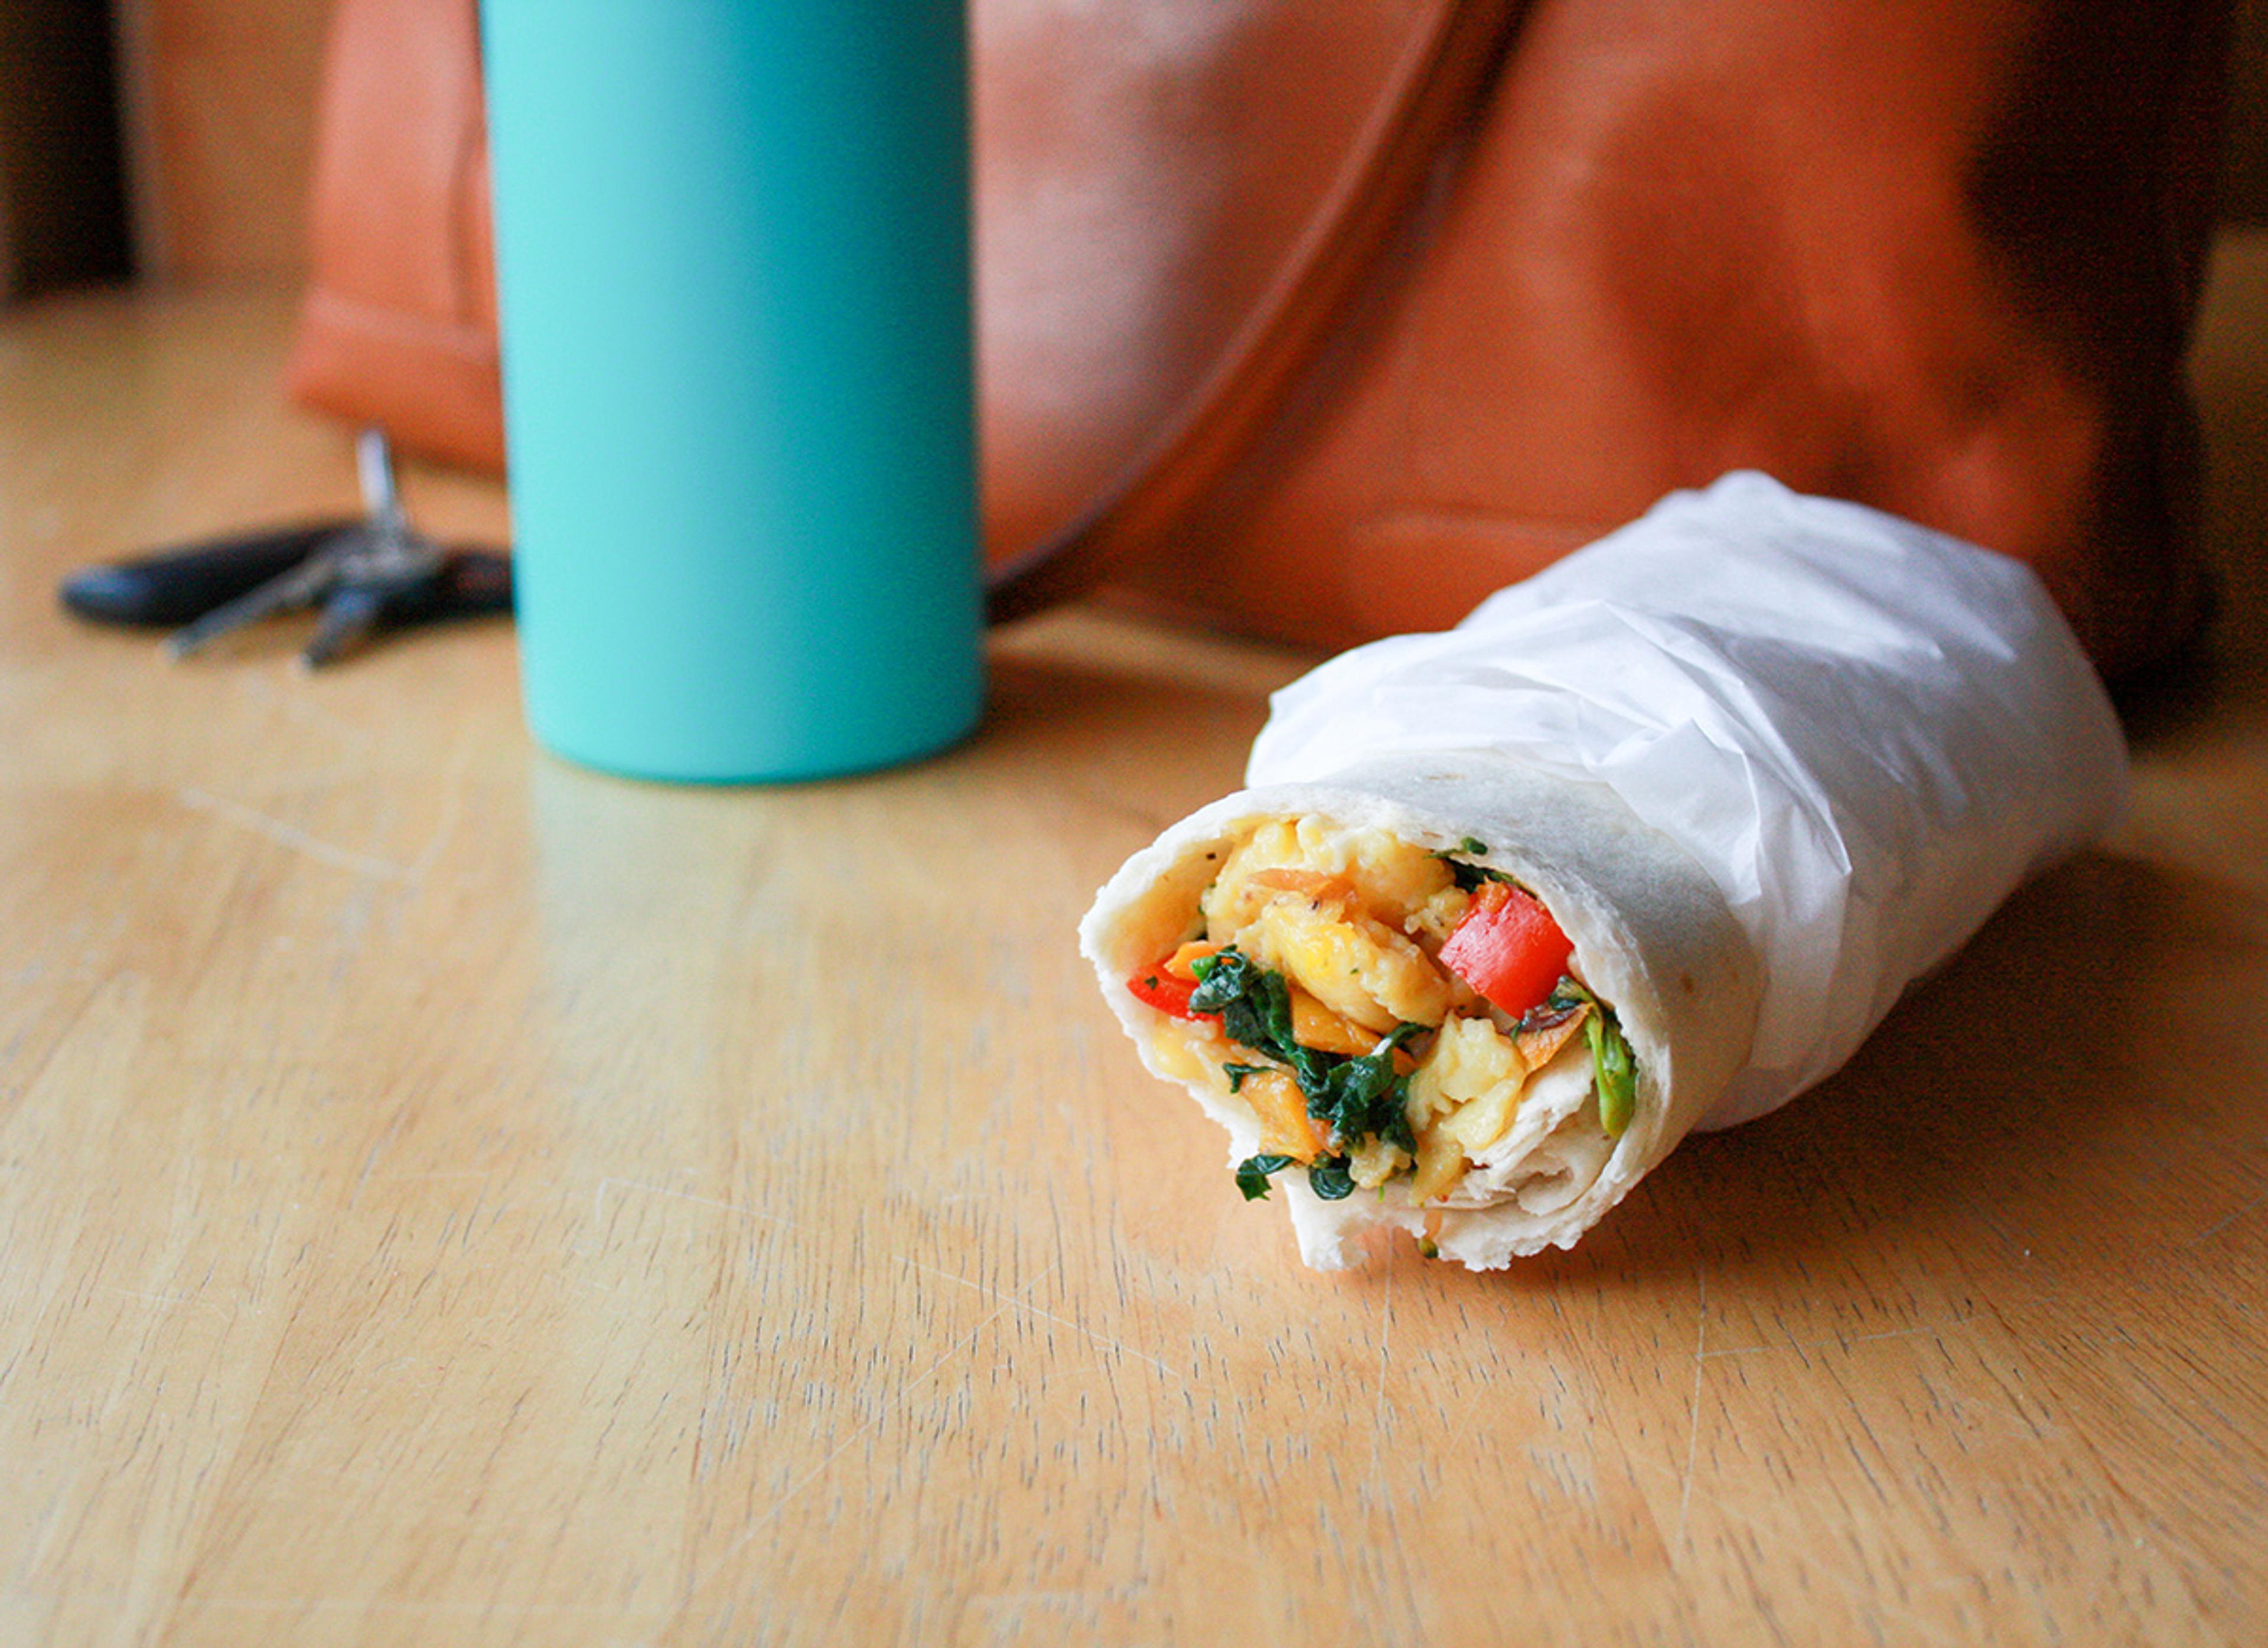  A wrapped breakfast burrito with the end open to show the filling sits on a table in front of a woman’s leather purse, water bottle and car keys.